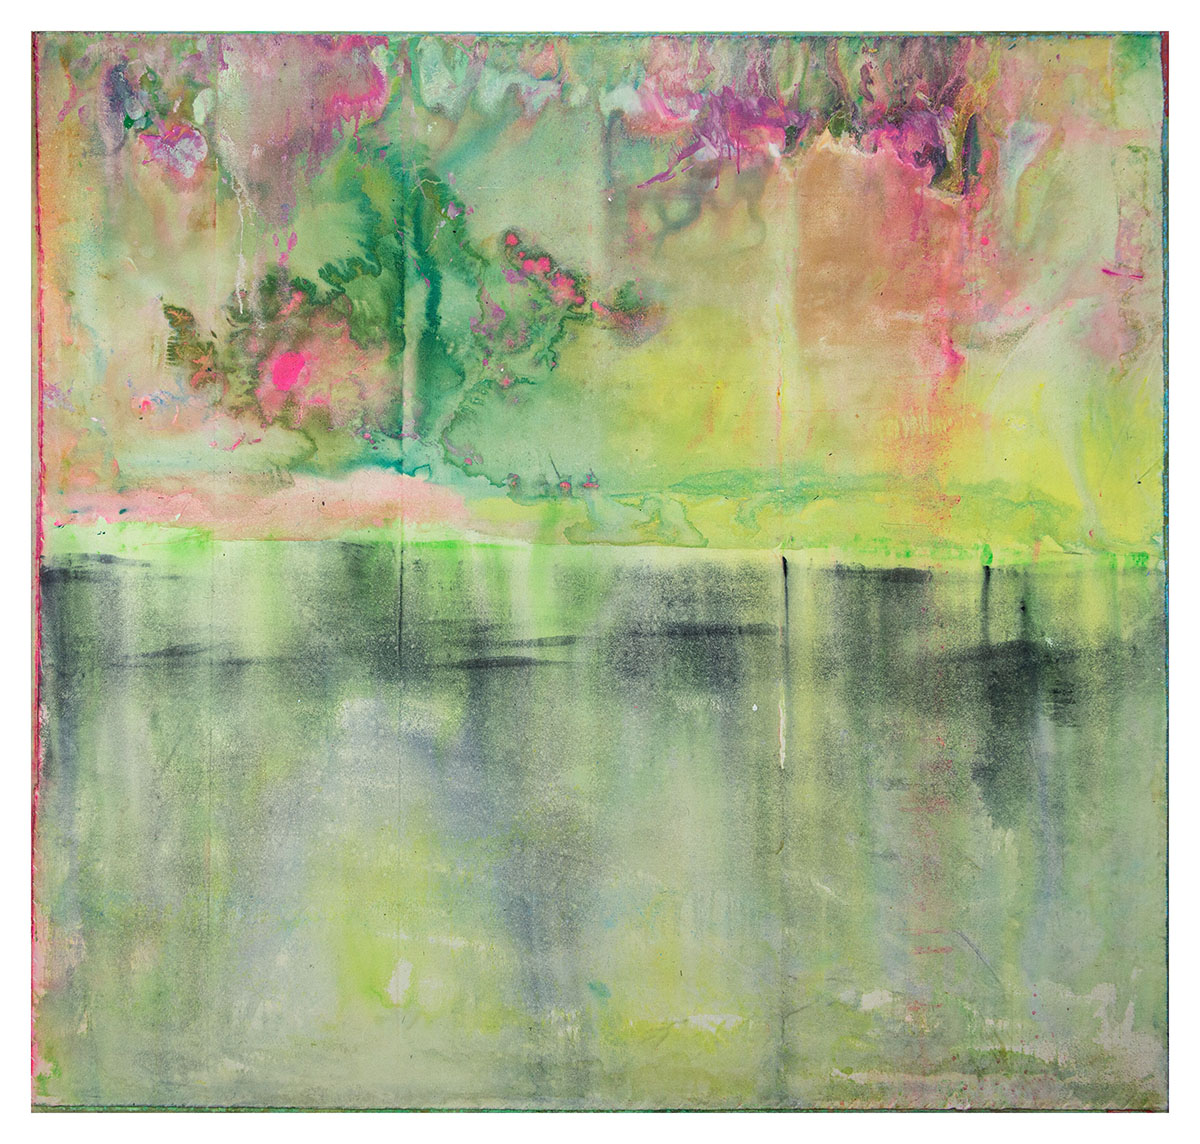 A green and pink abstract painting